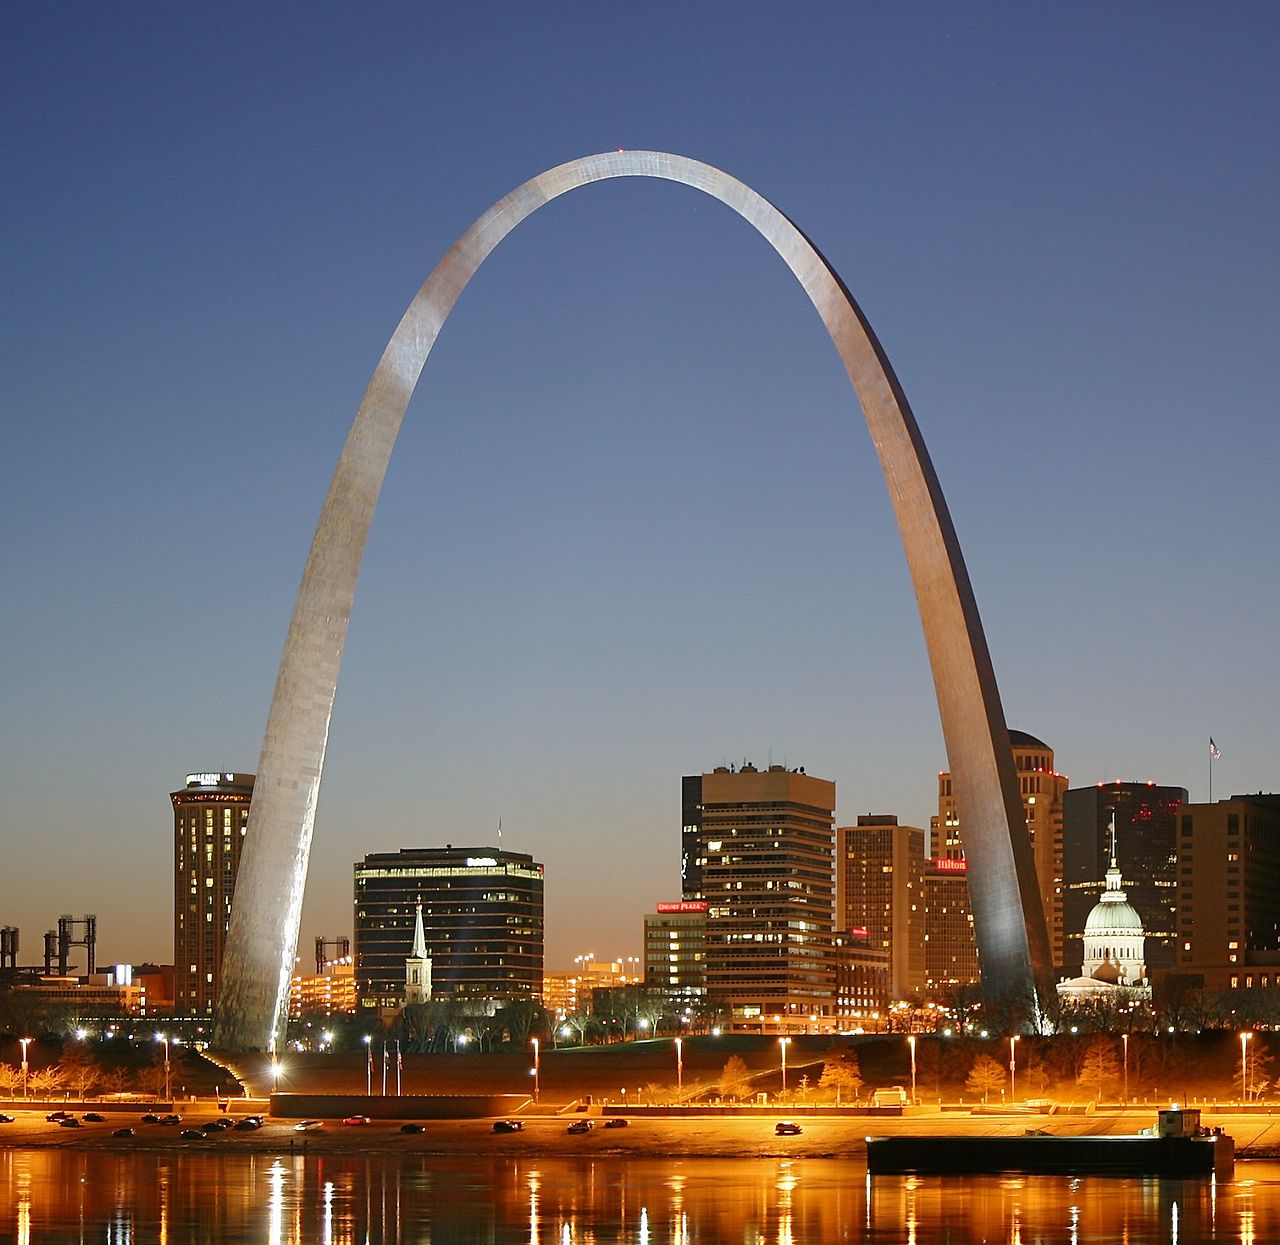 The St Louis Gateway Arch symbolizes America’s westward expansion. Completed in 1965, the 630-foot tall, stainless steel structure is listed on the National Register of Historic Places and as a U.S. Historic Landmark. Visitors can ride to the top in tiny trams cars, not recommended for the claustrophobic. (Photo by Daniel Schwen)